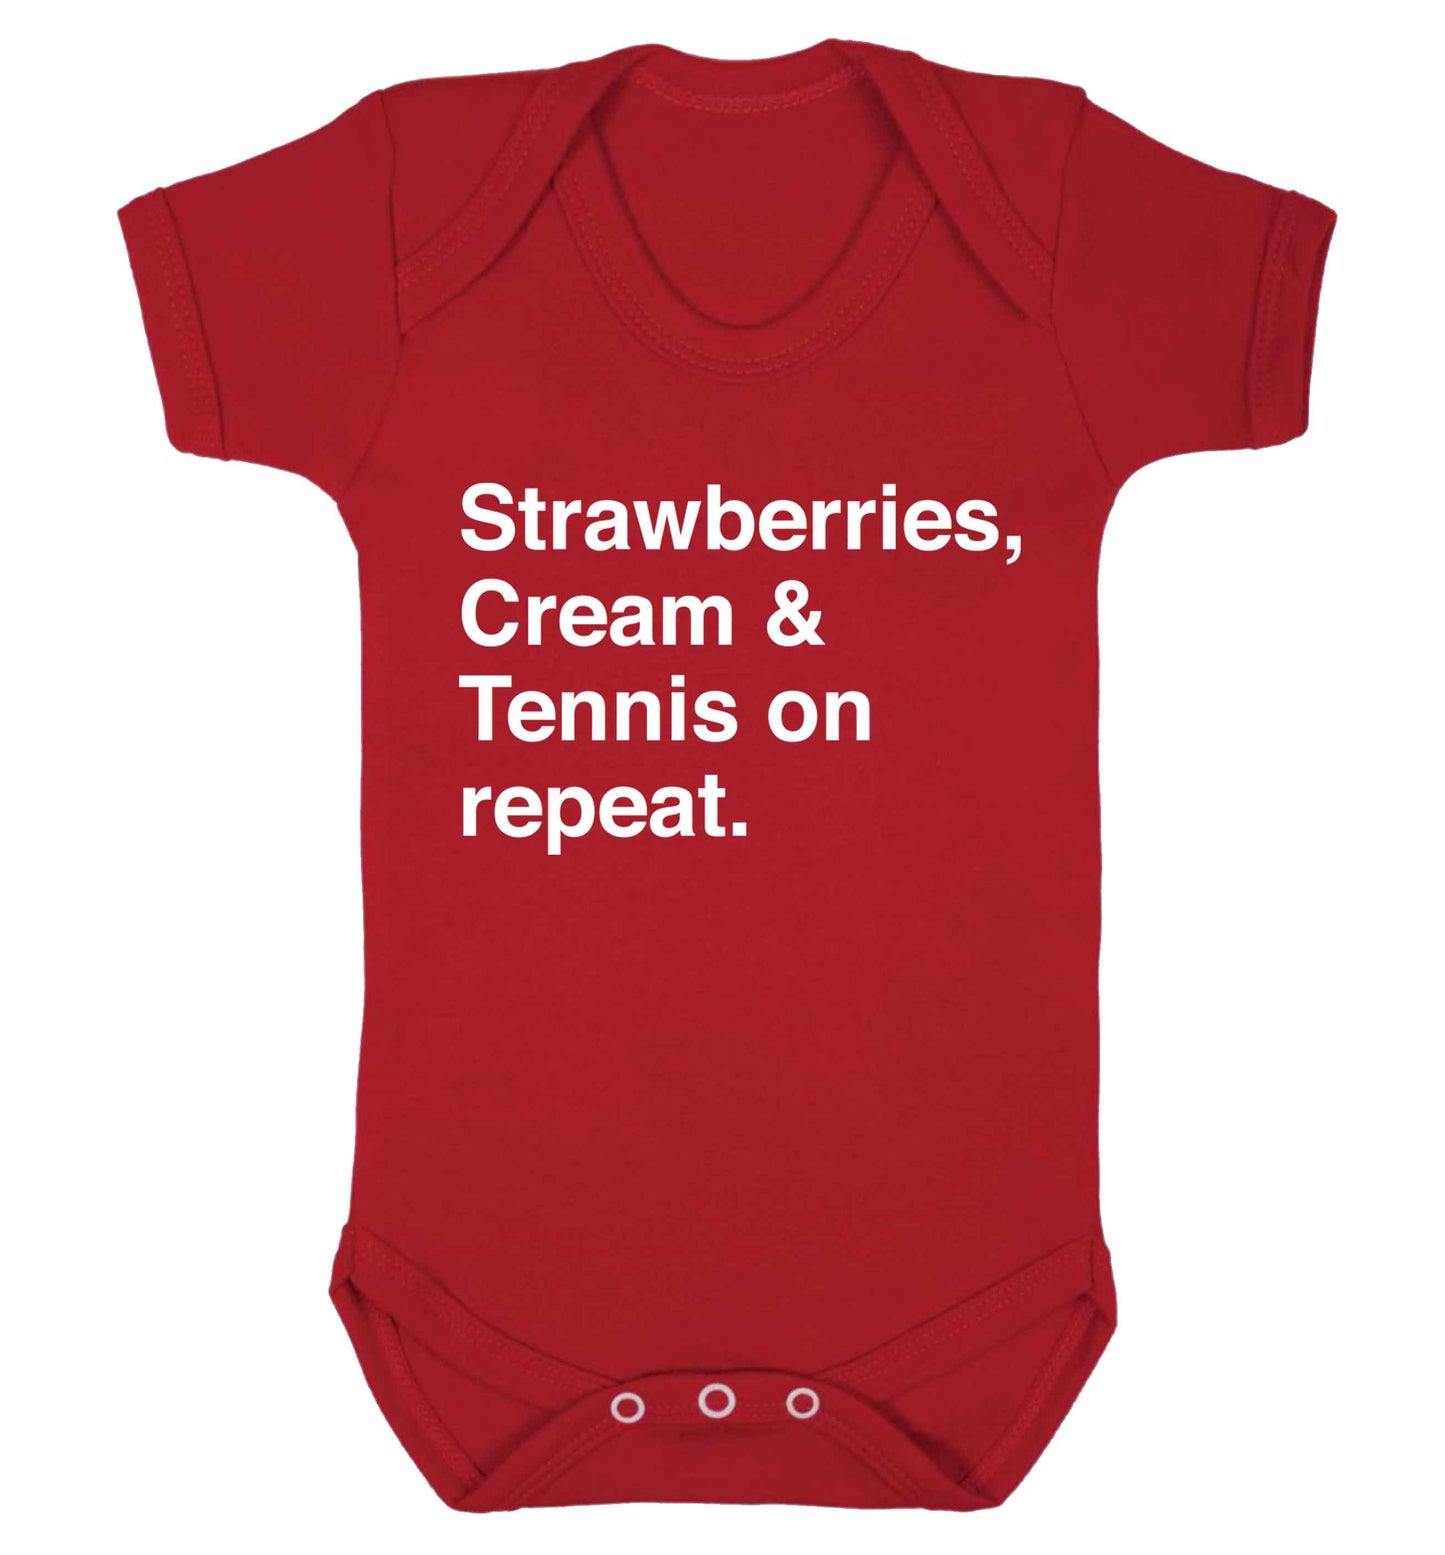 Strawberries, cream and tennis on repeat Baby Vest red 18-24 months